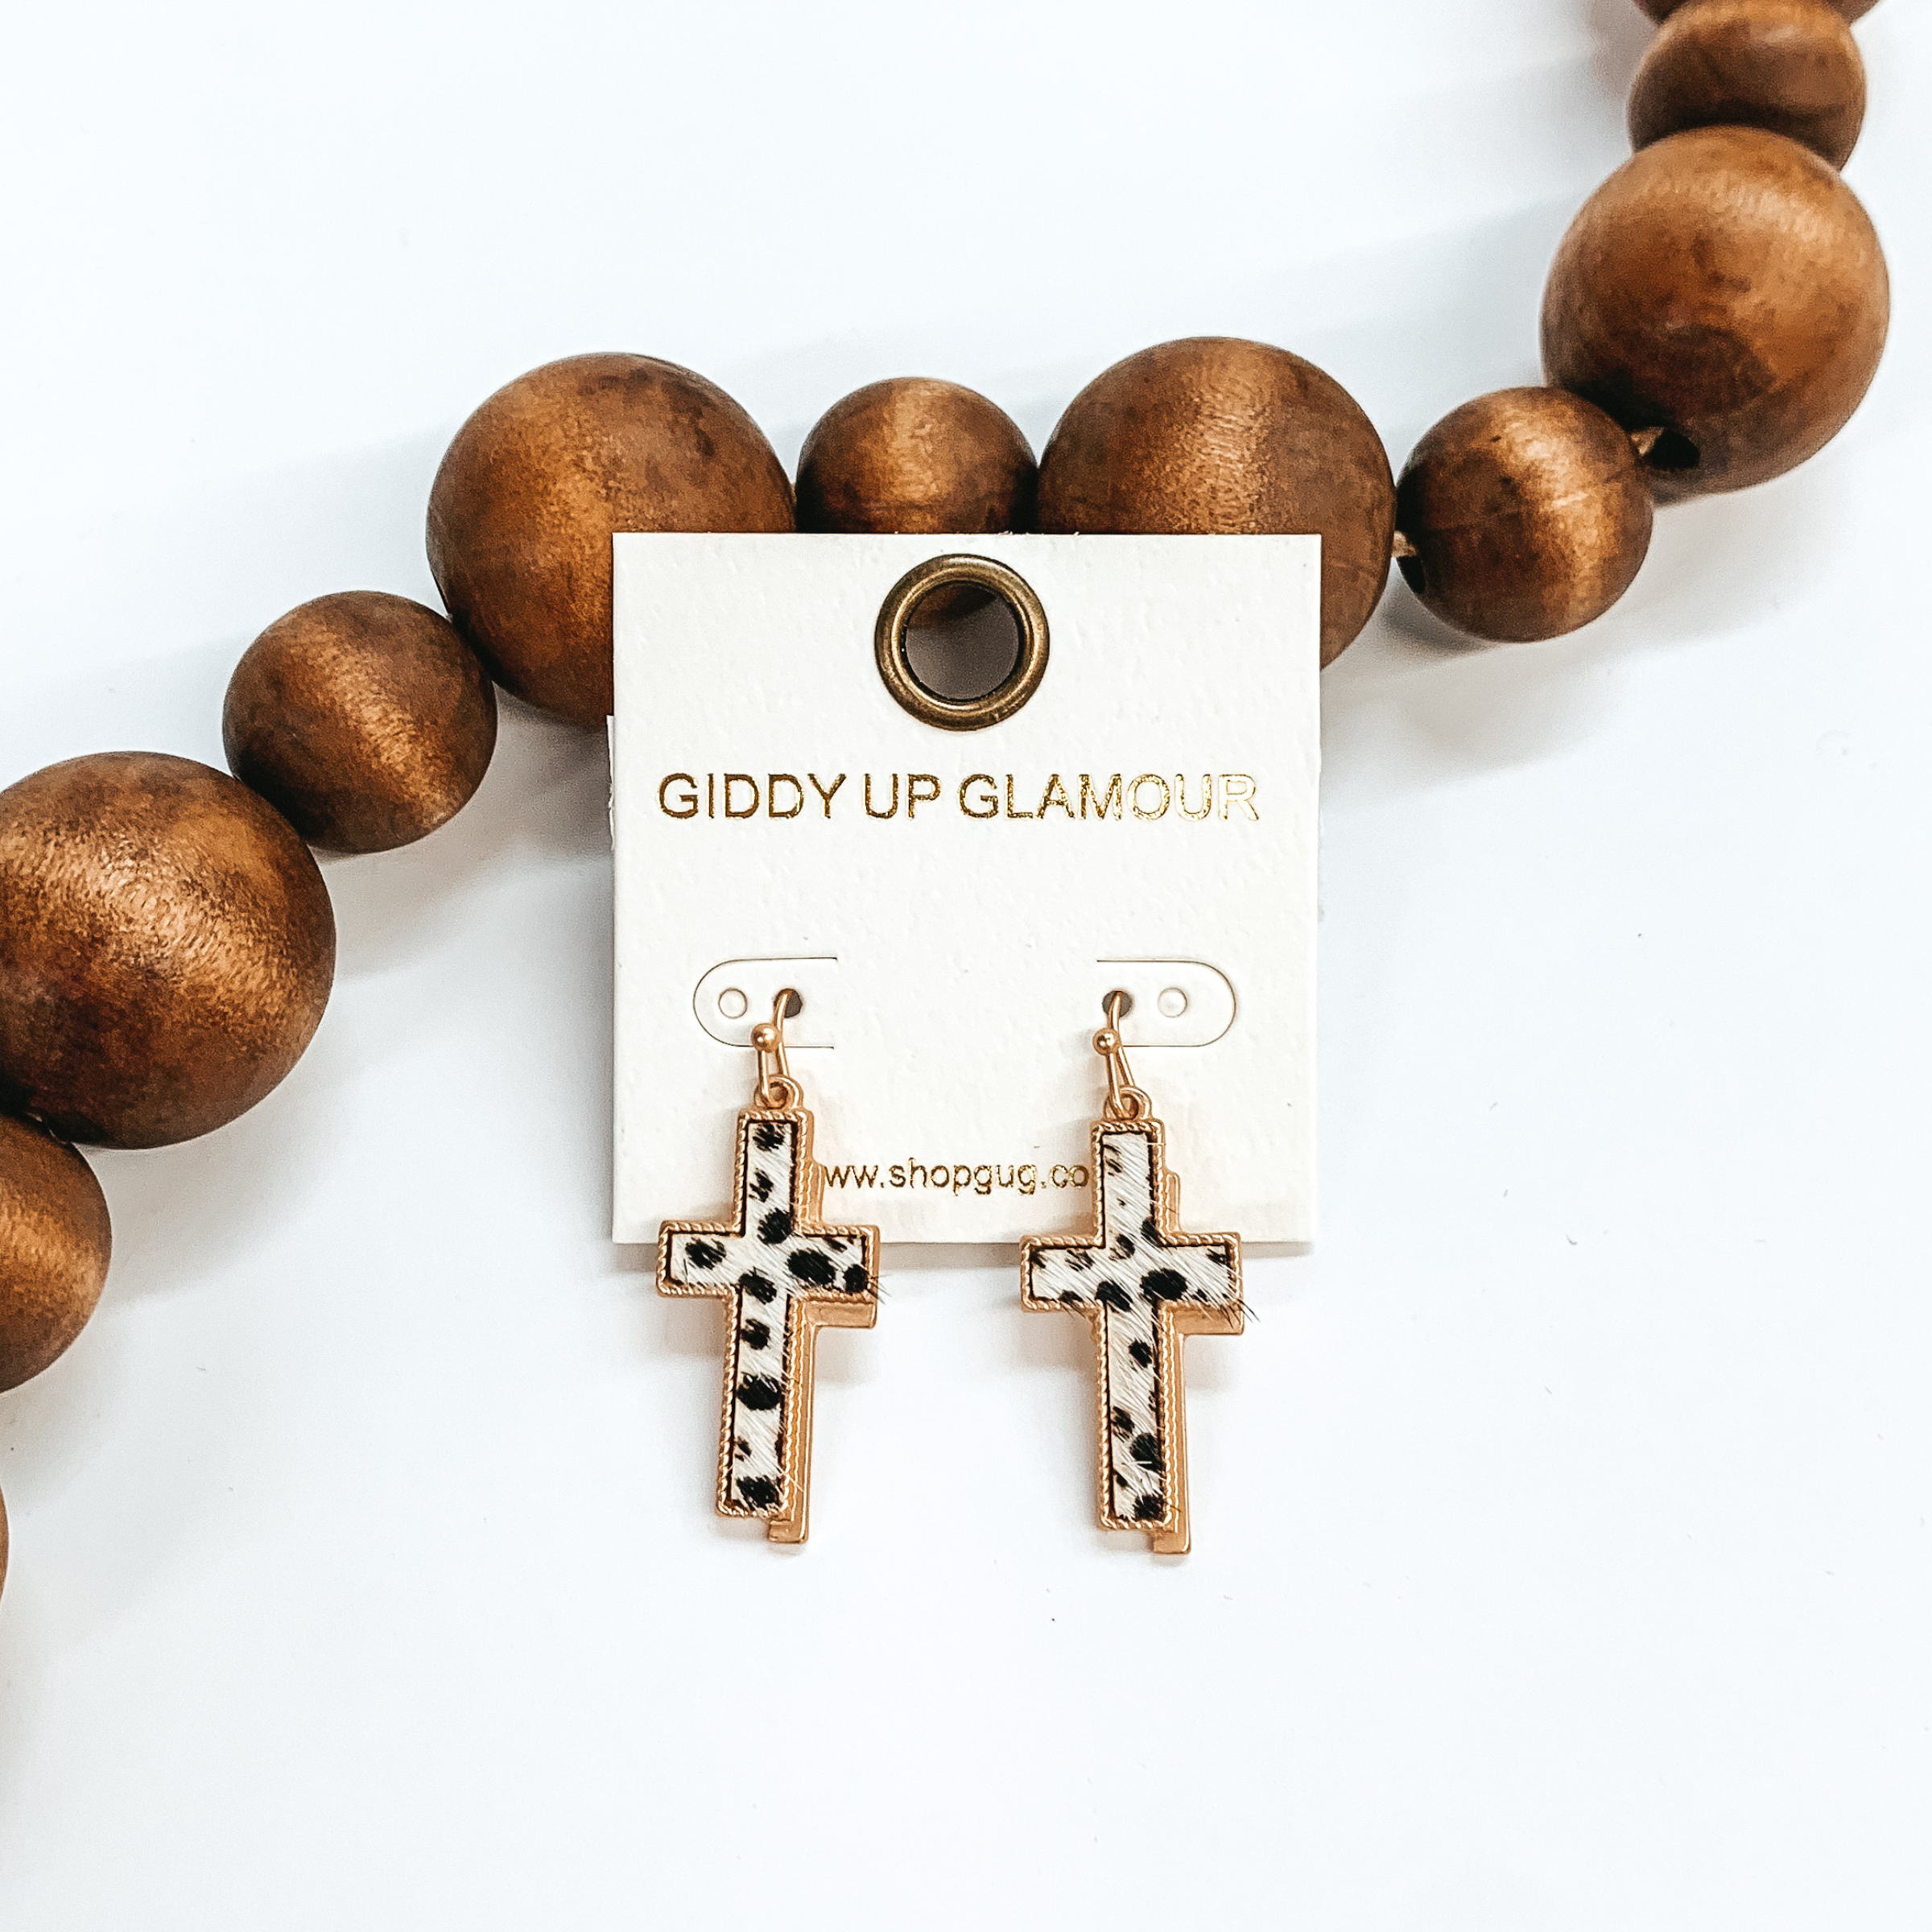 Gold cross earrings with a faux hide inlay in black and white dotted print. They have a gold shadow as well. These earrings are taken leaning up  against dark brown beads and white background.